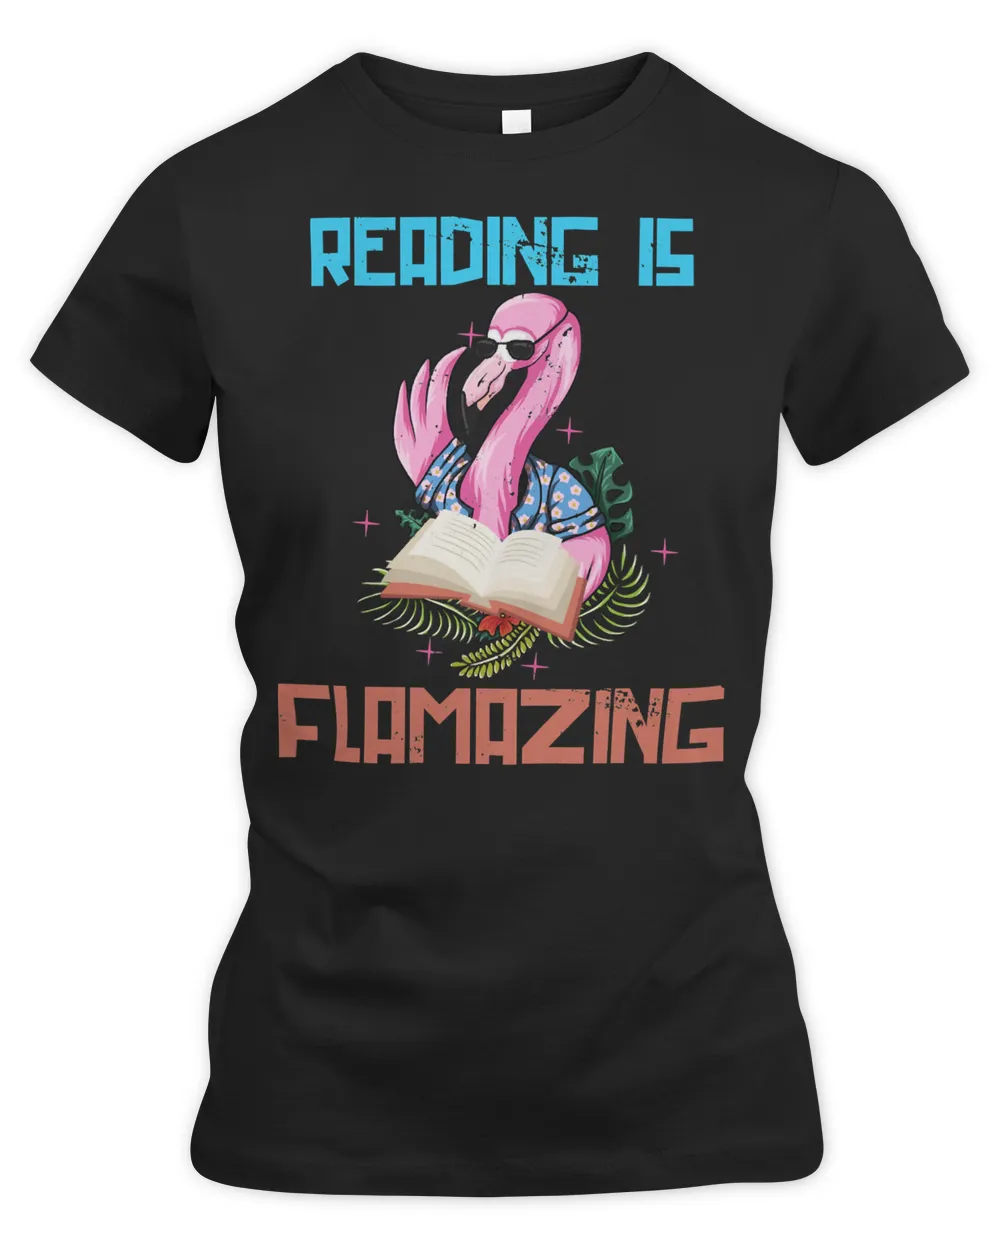 Book Reader who also loves animals like the flamingo 378 booked Books Reading Fan